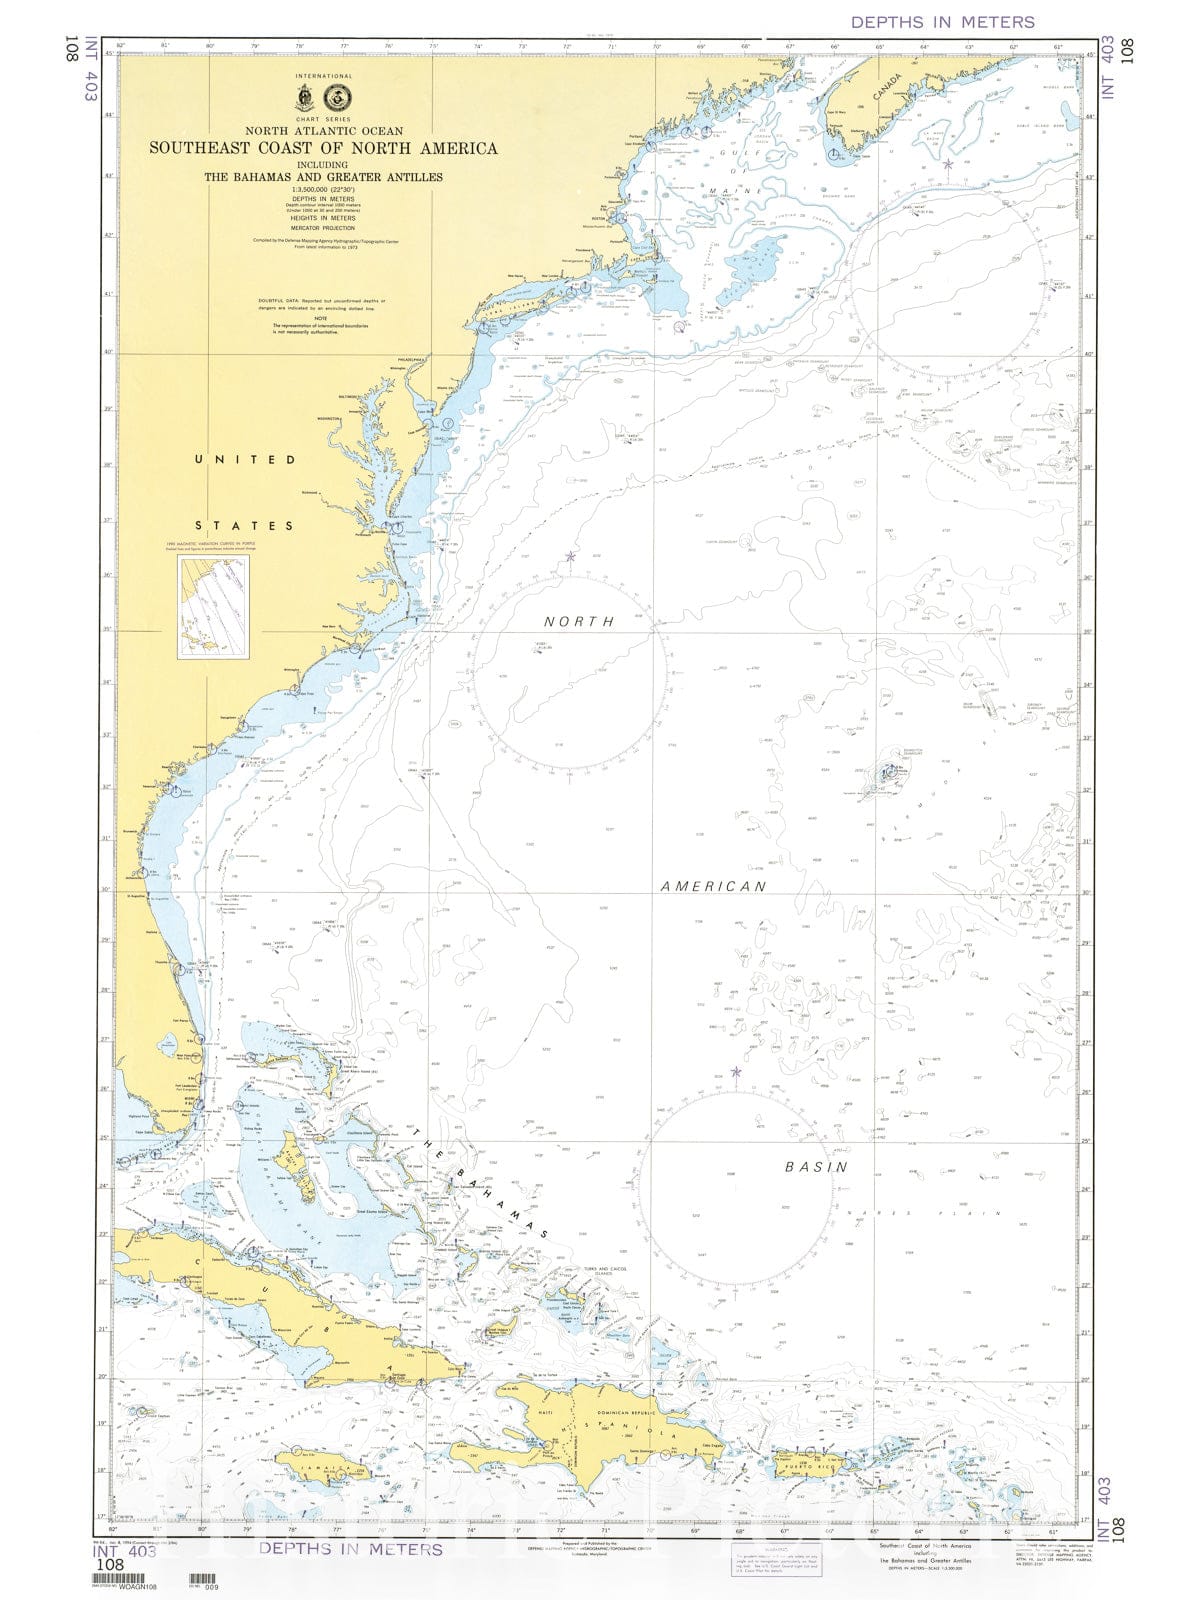 Historical Map, 1994 North Atlantic Ocean, Southeast Coast of North America, Including The Bahamas and Greater Antilles, Vintage Wall Art